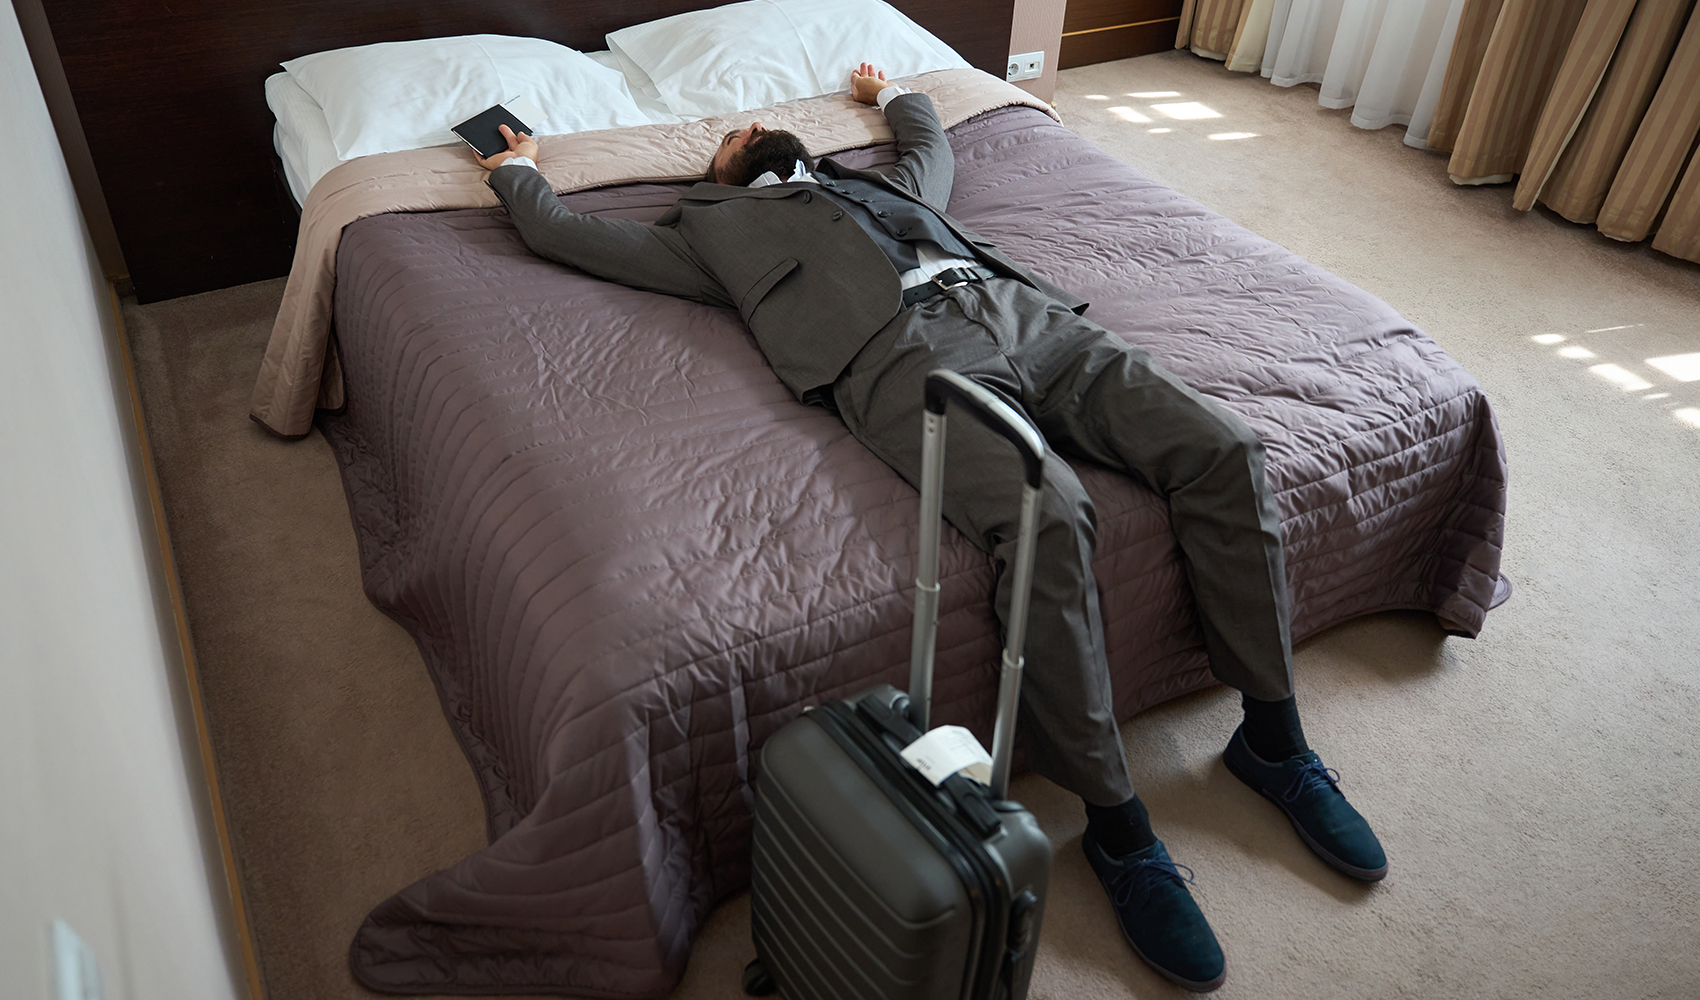 8 Tips to Help Get Over Jet Lag